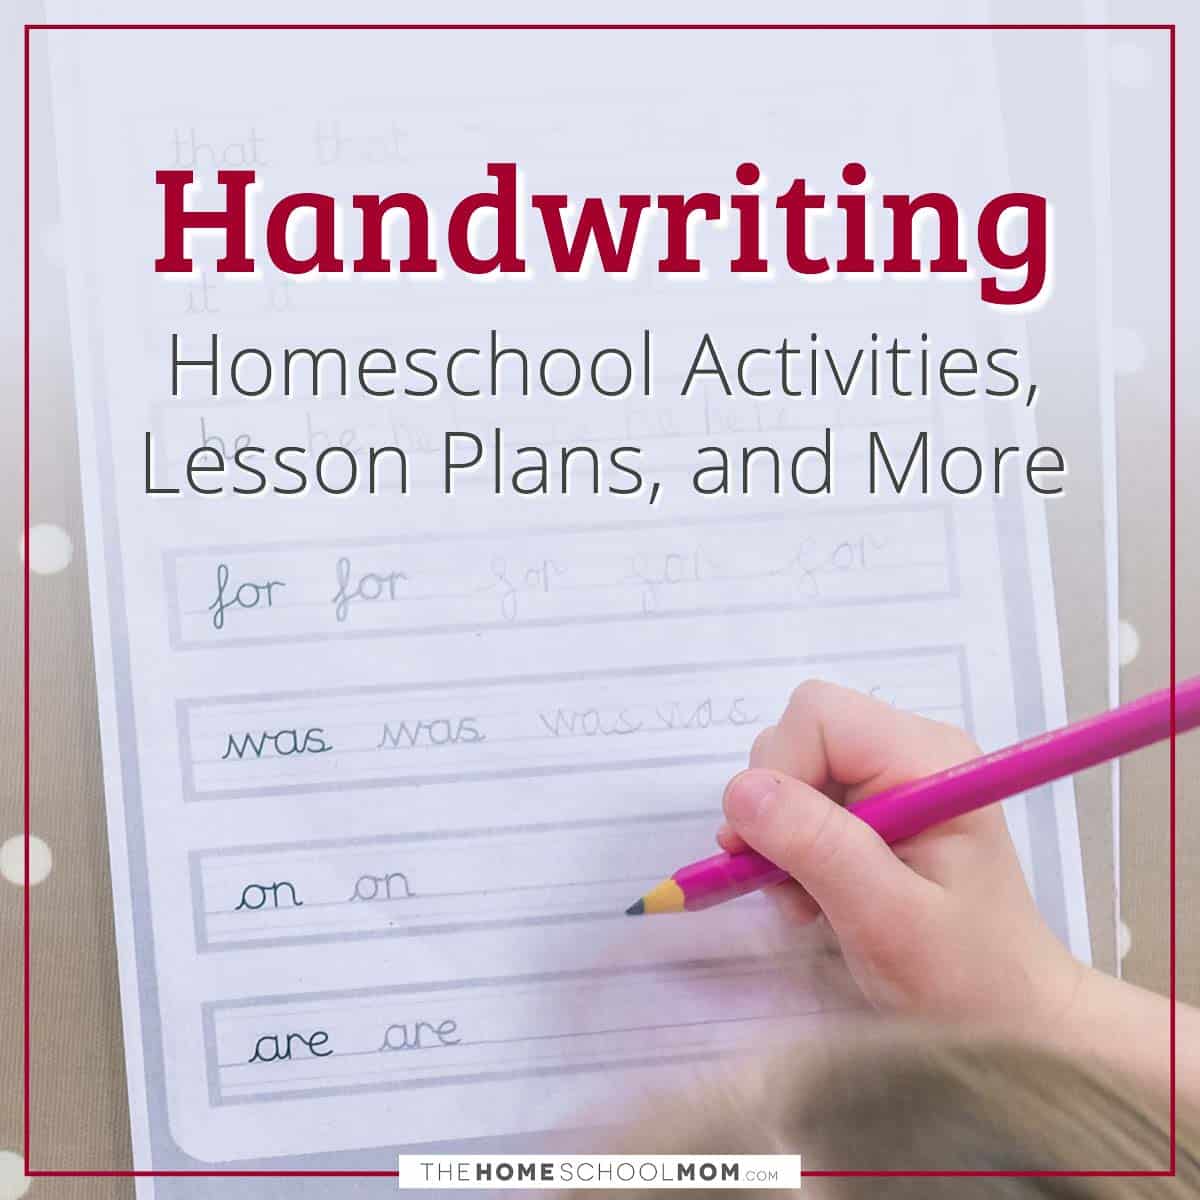 Handwriting Homeschool Activities, Lesson Plans, and More.